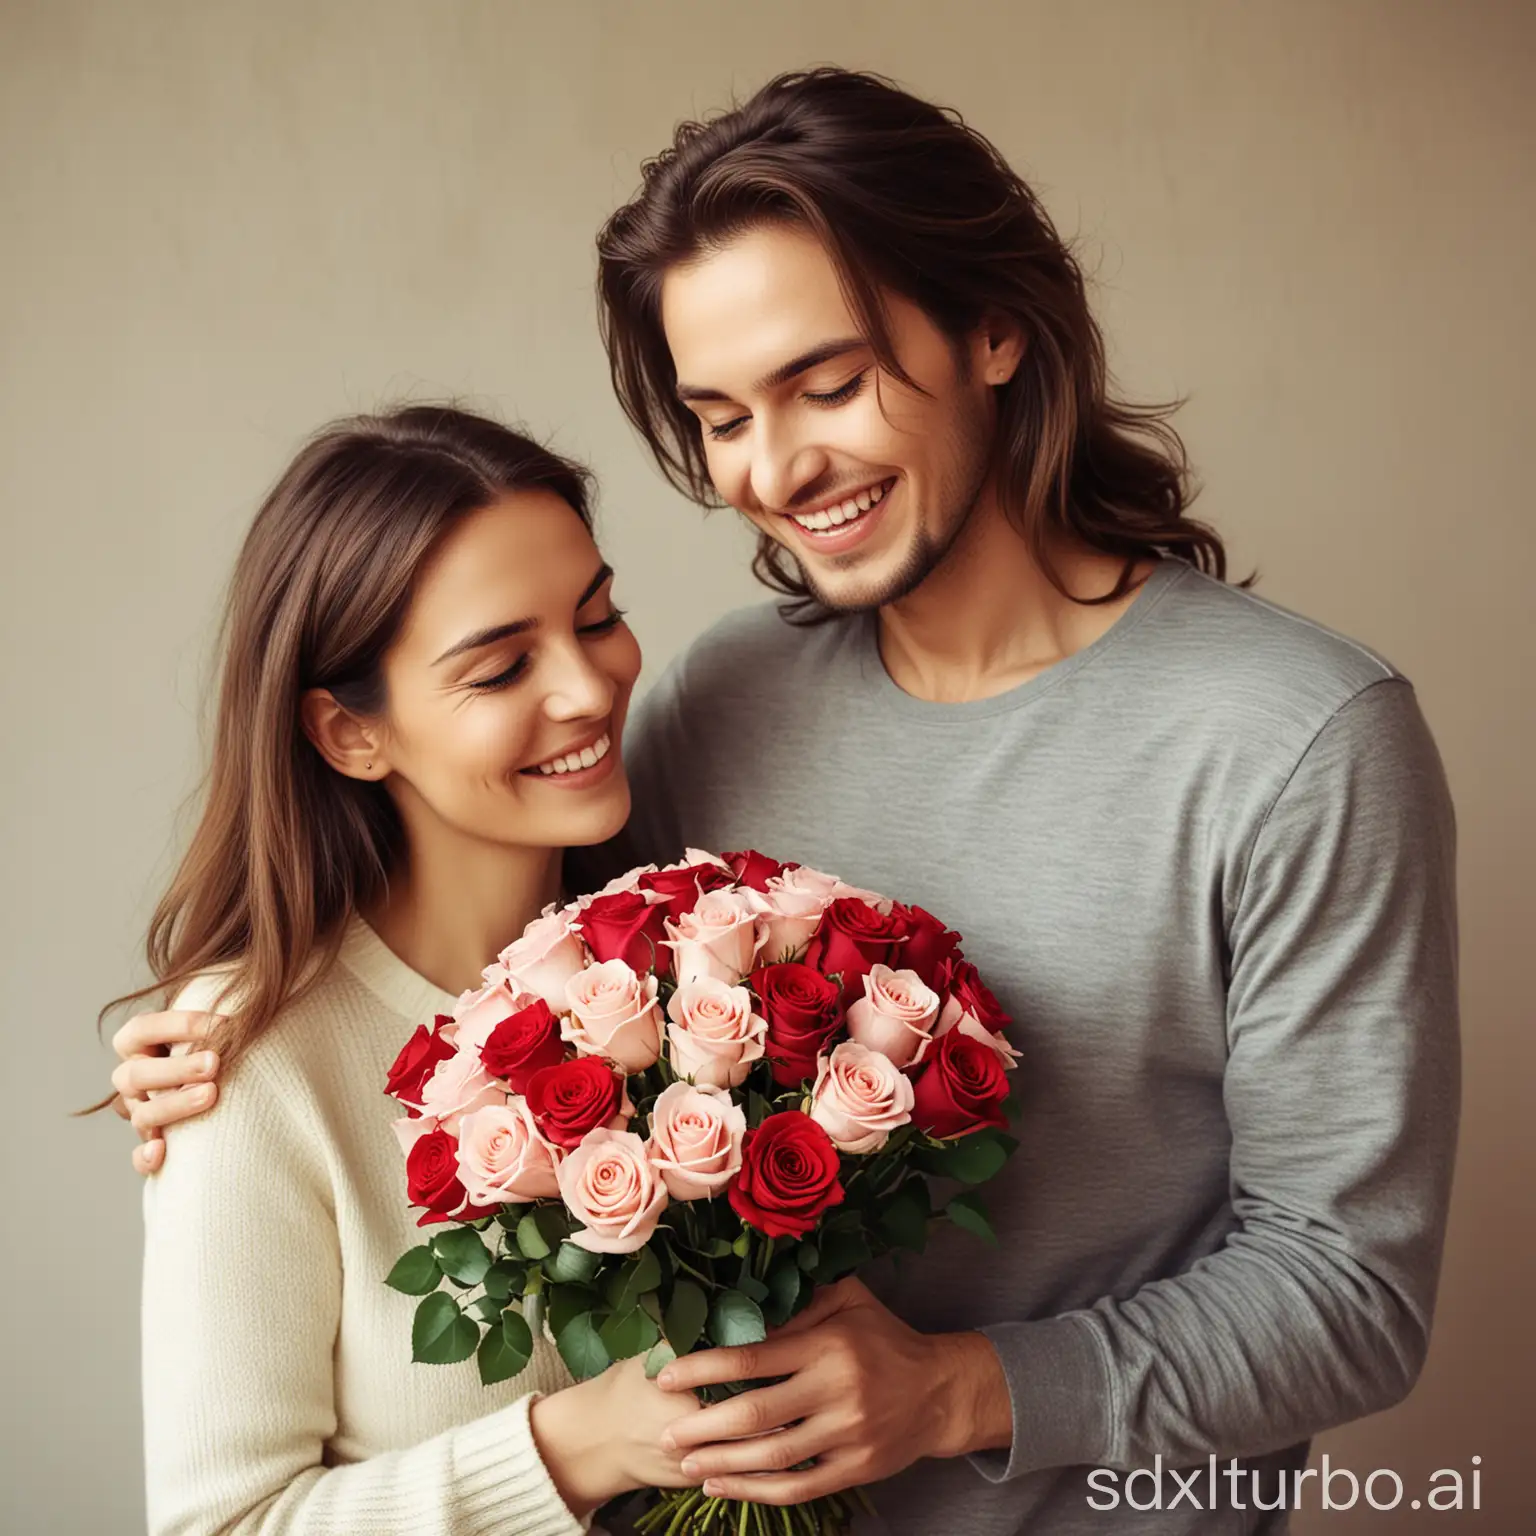 Happy family. He gave her a bouquet of roses. She is happy